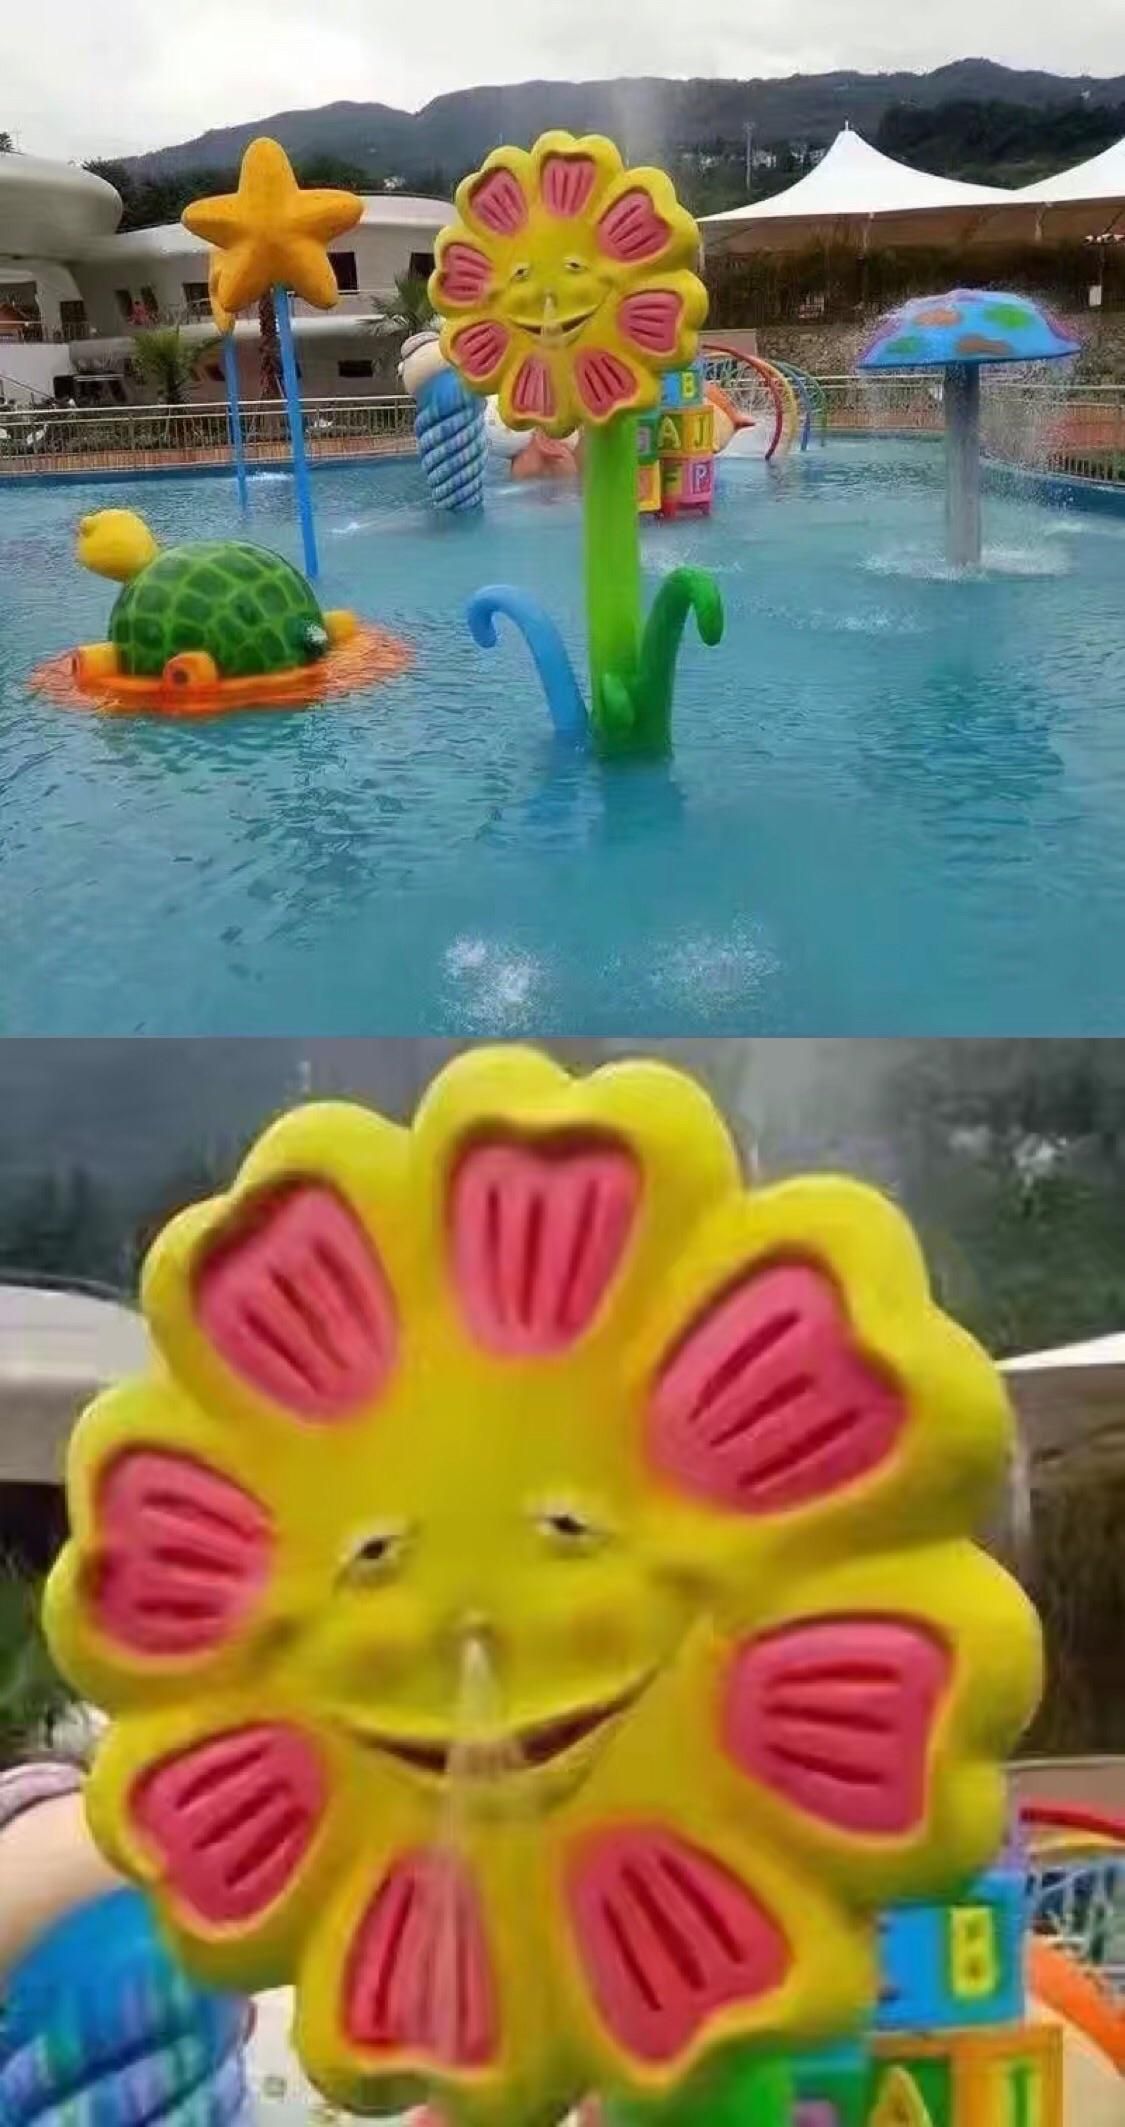 This 'Flower' in a water park